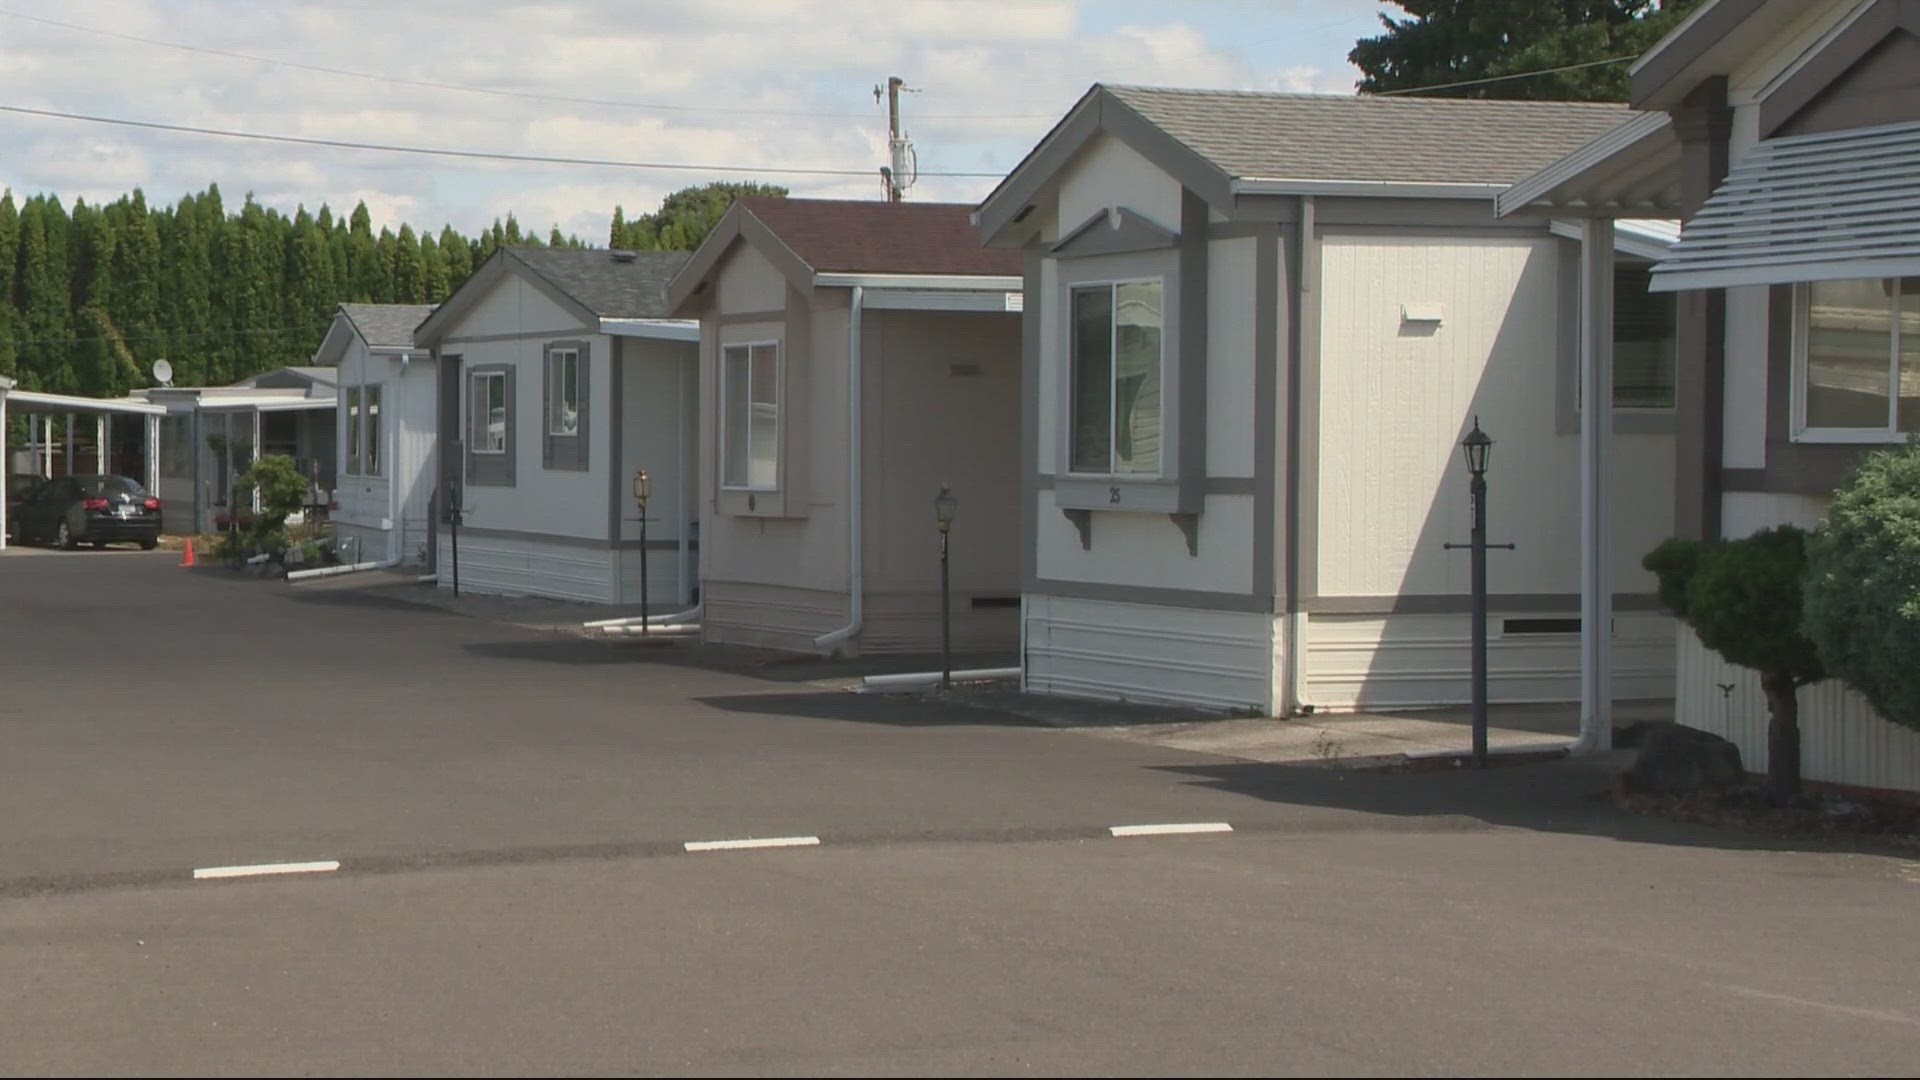 Residents at Hazel Dell RV park report 50% rent spike